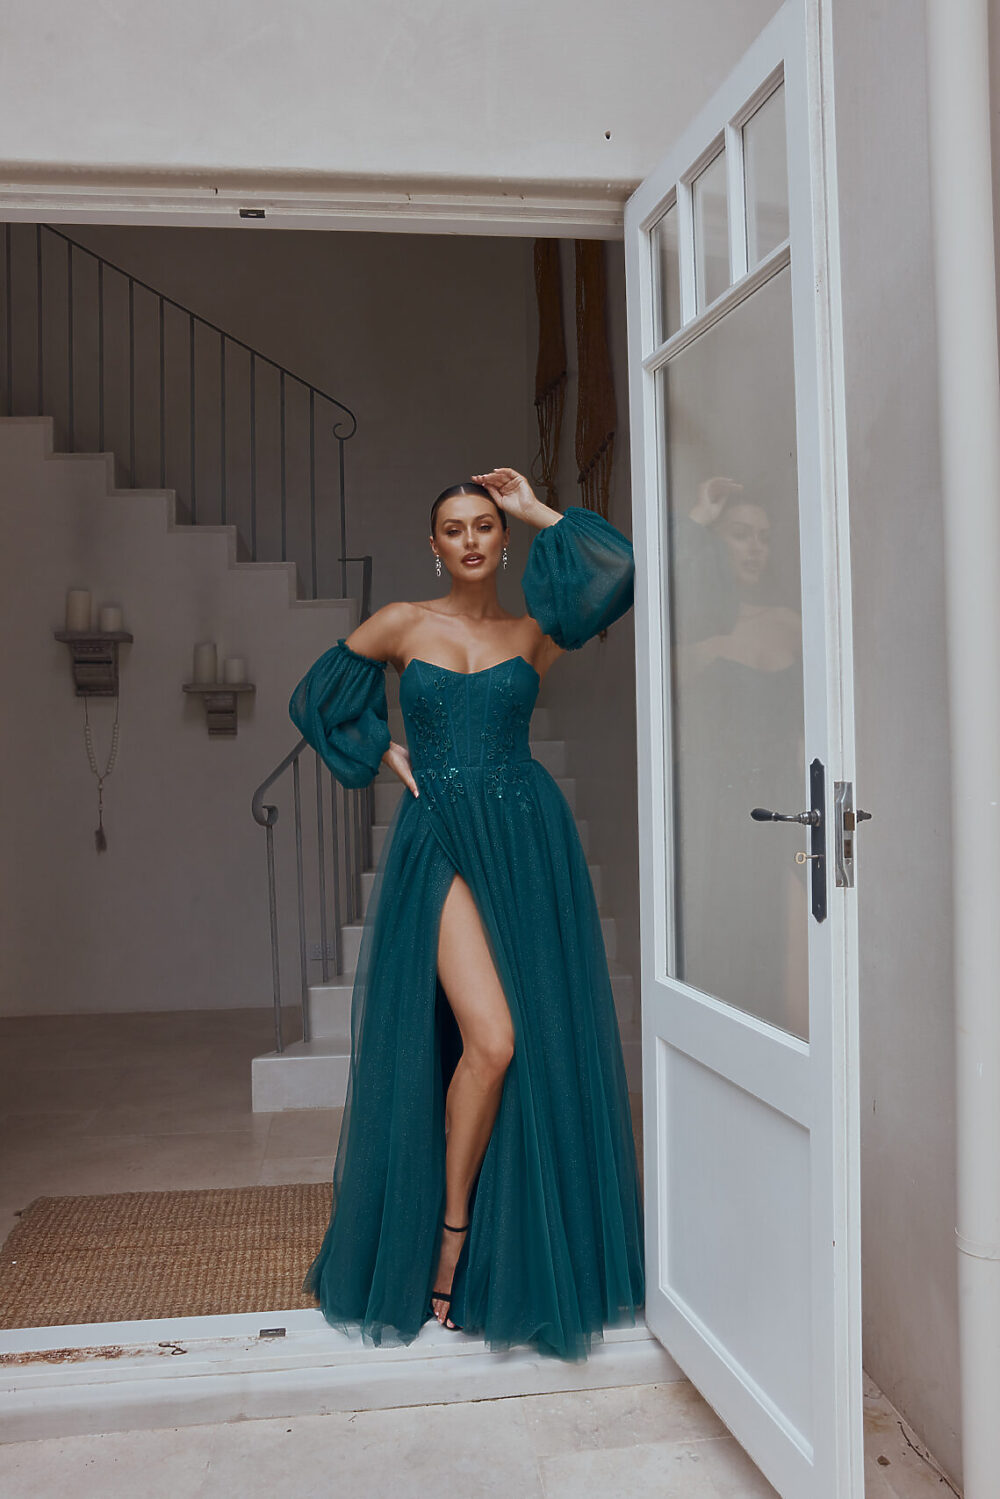 Lily PO2305 Mystique Collection dress by Tania Olsen Designs